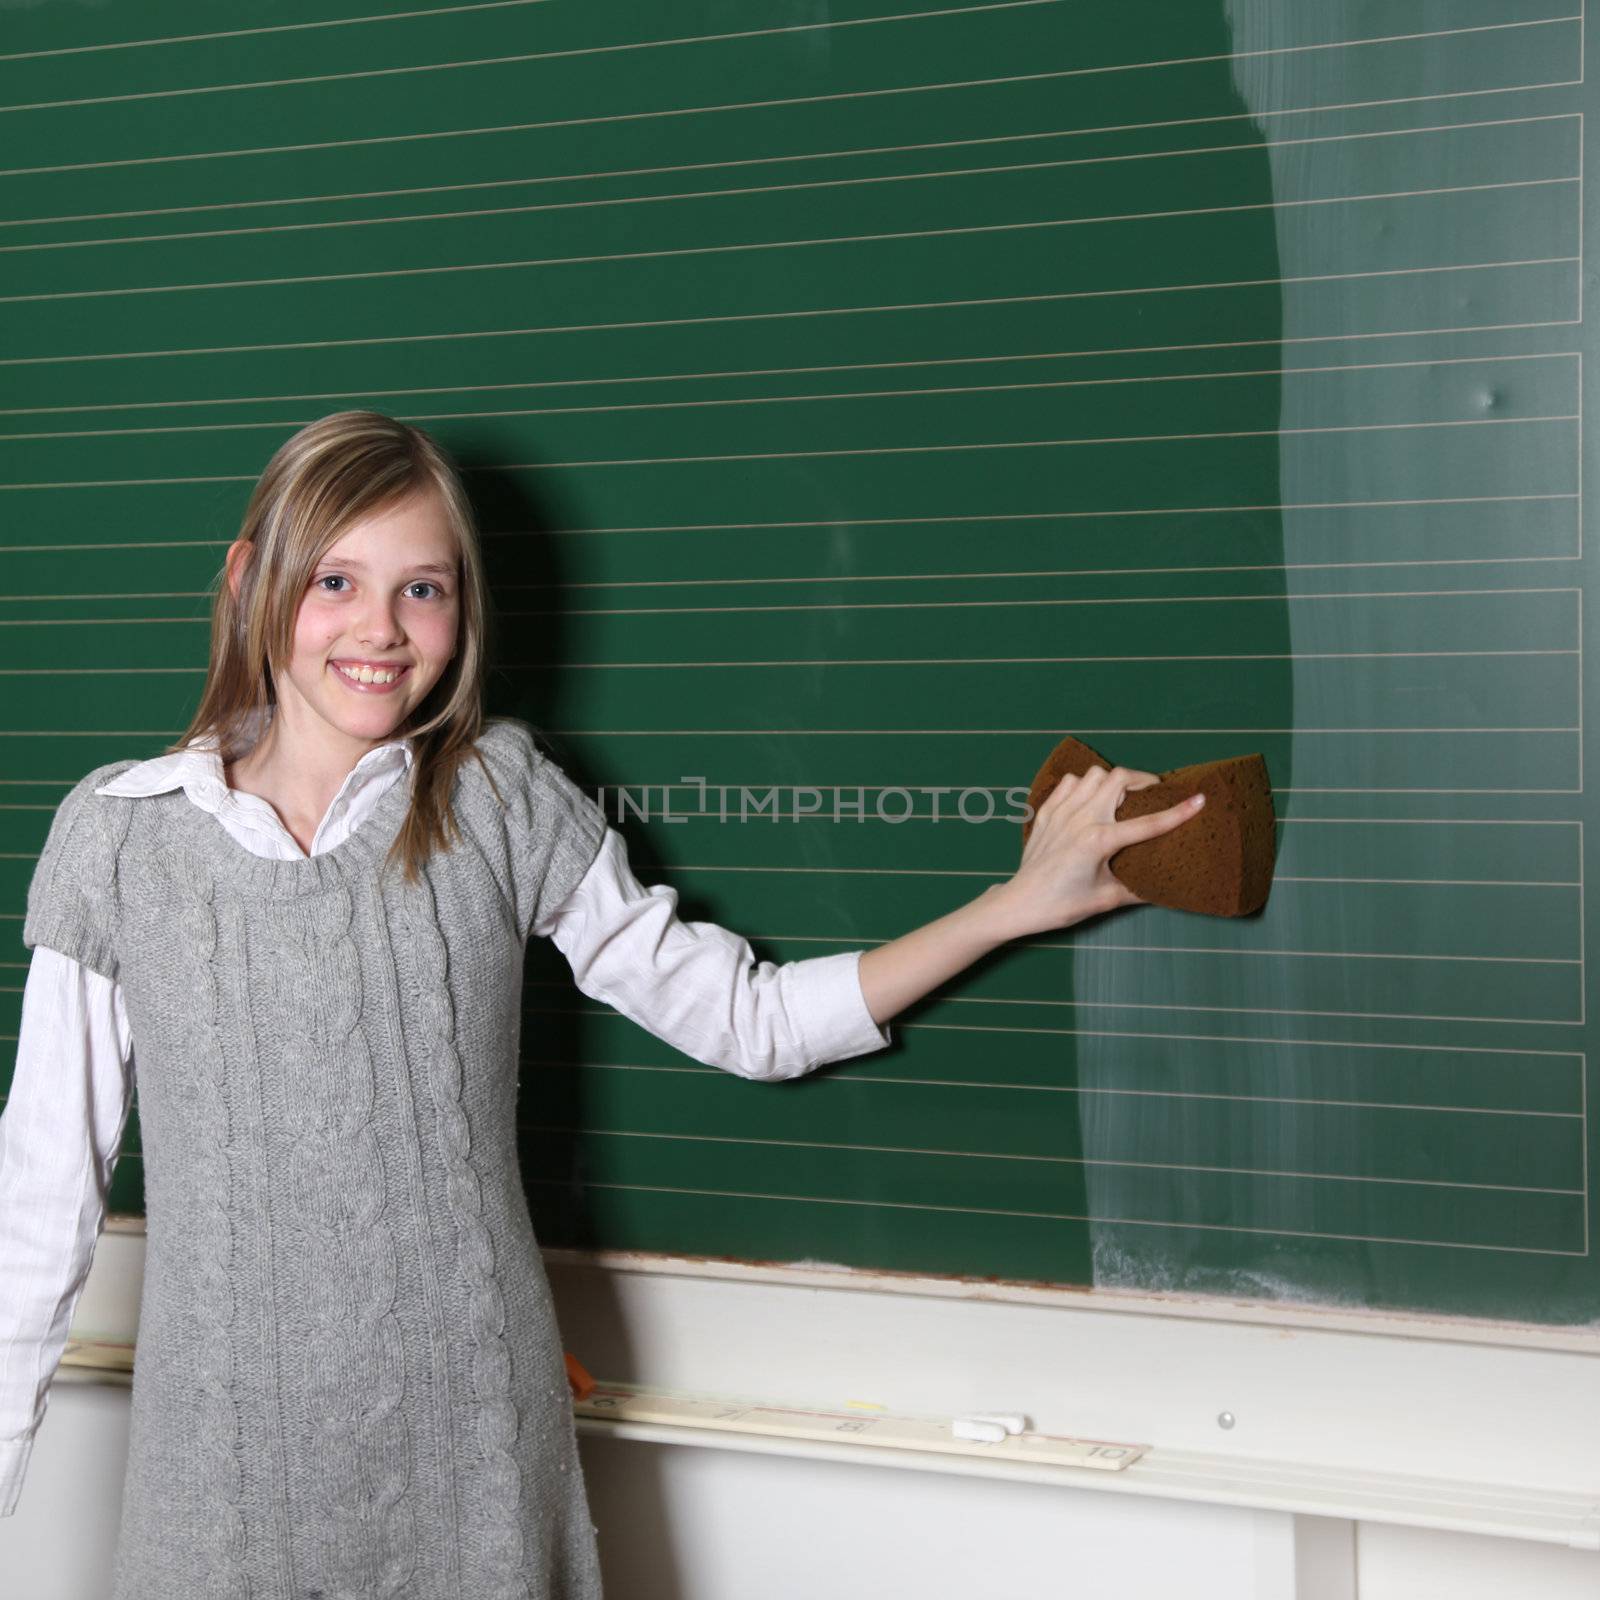 School girls at the blackboard. She wipes the table and smiles - Copy Space